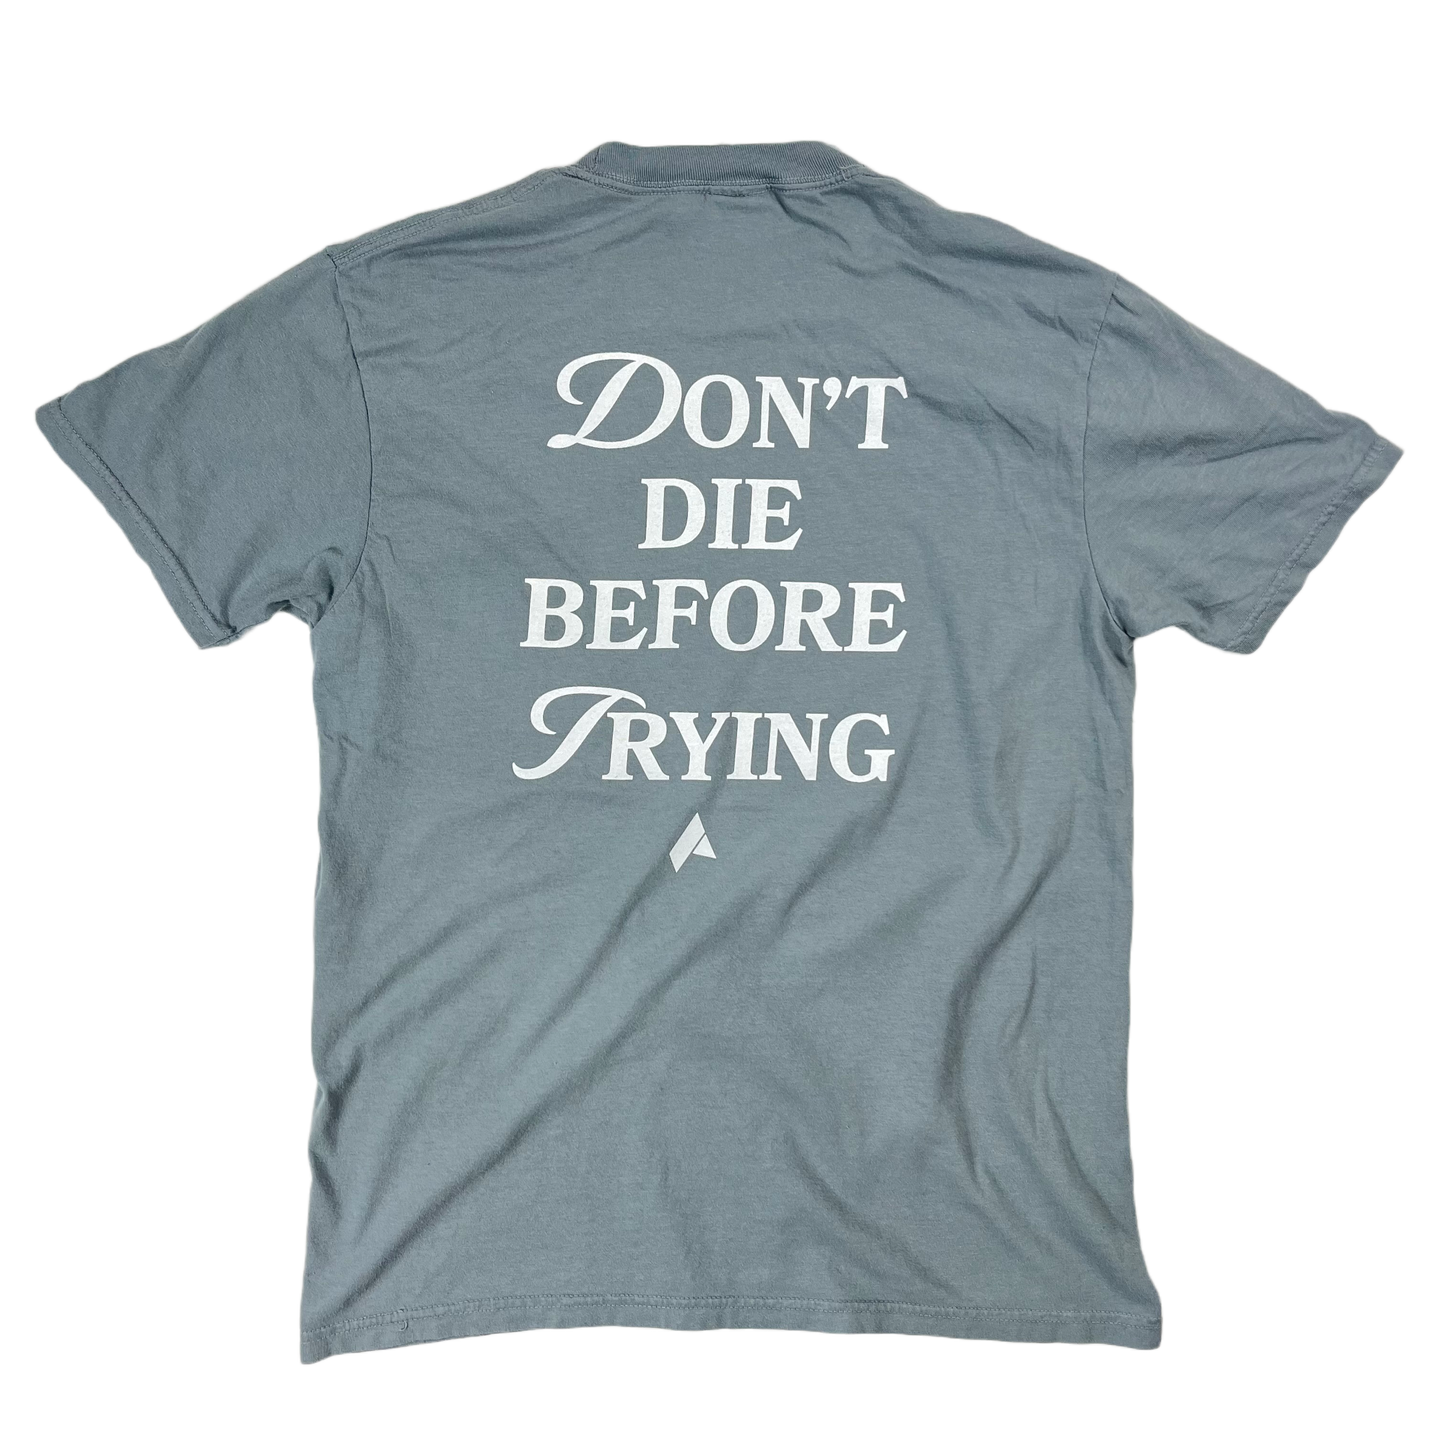 Don't Die Before Trying Tee